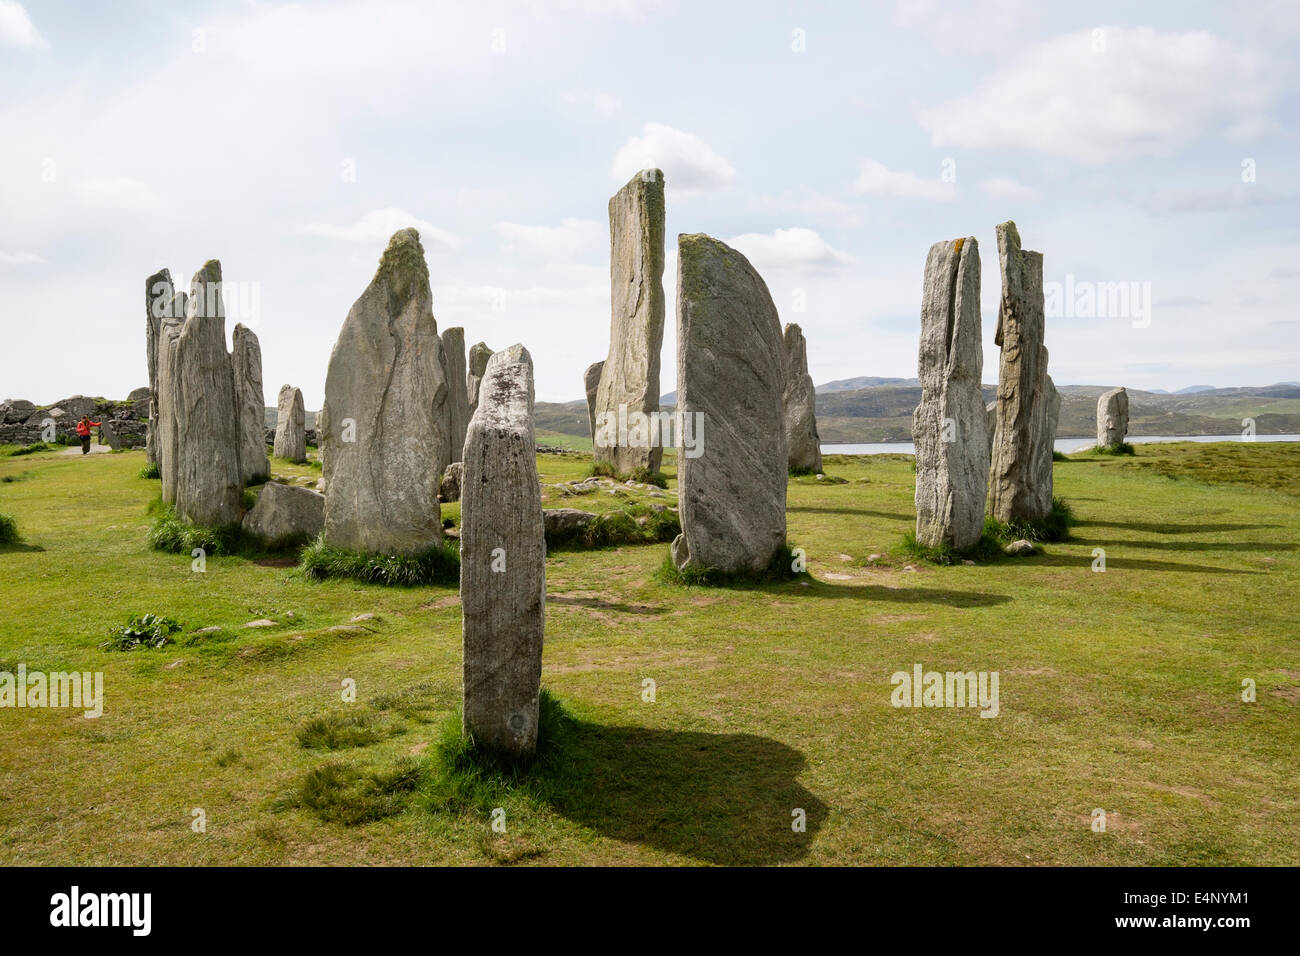 Callanish Stone Circle Neolithic standing stones from 4500 BC Calanais Isle of Lewis Outer Hebrides Western Isles Scotland UK Stock Photo